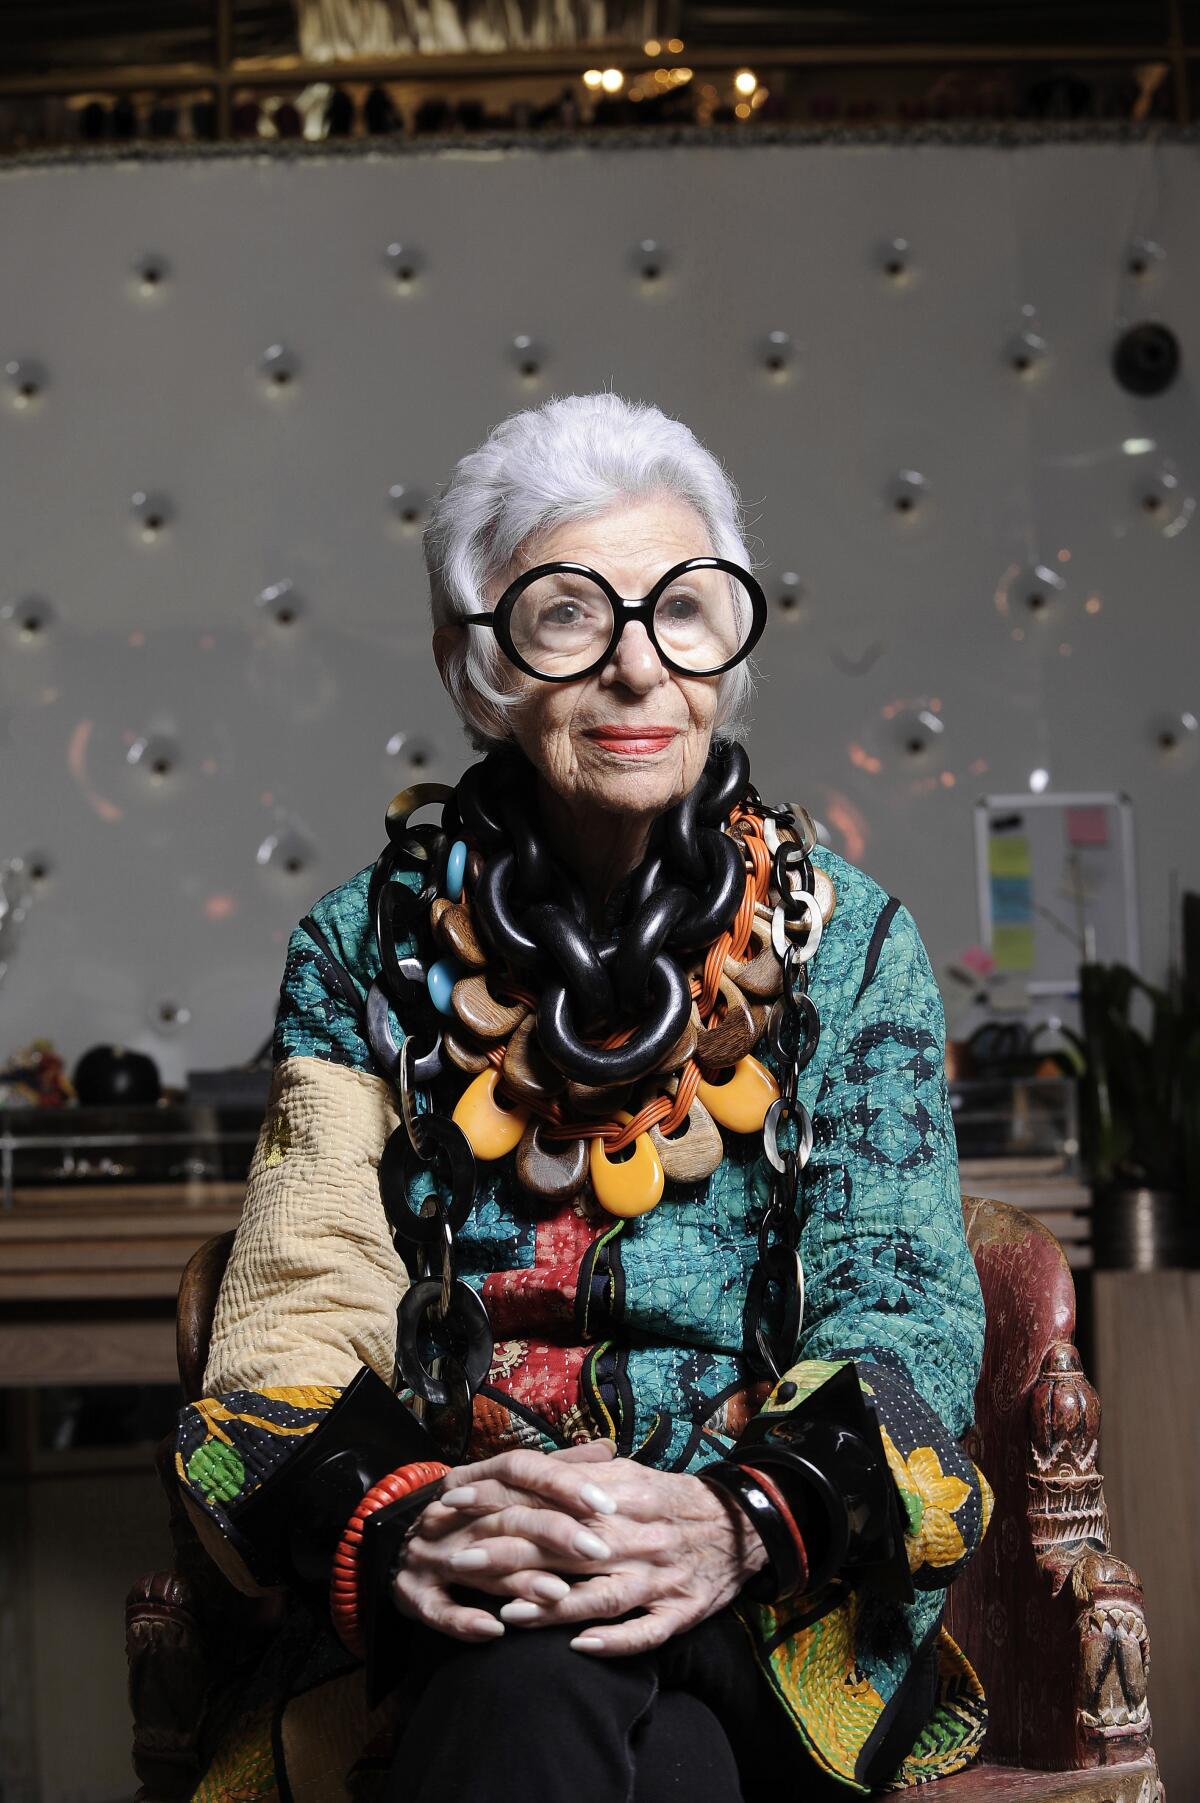 Iris Apfel, the 97-Year-Old Fashion Icon, Signs With Modeling Agency IMG